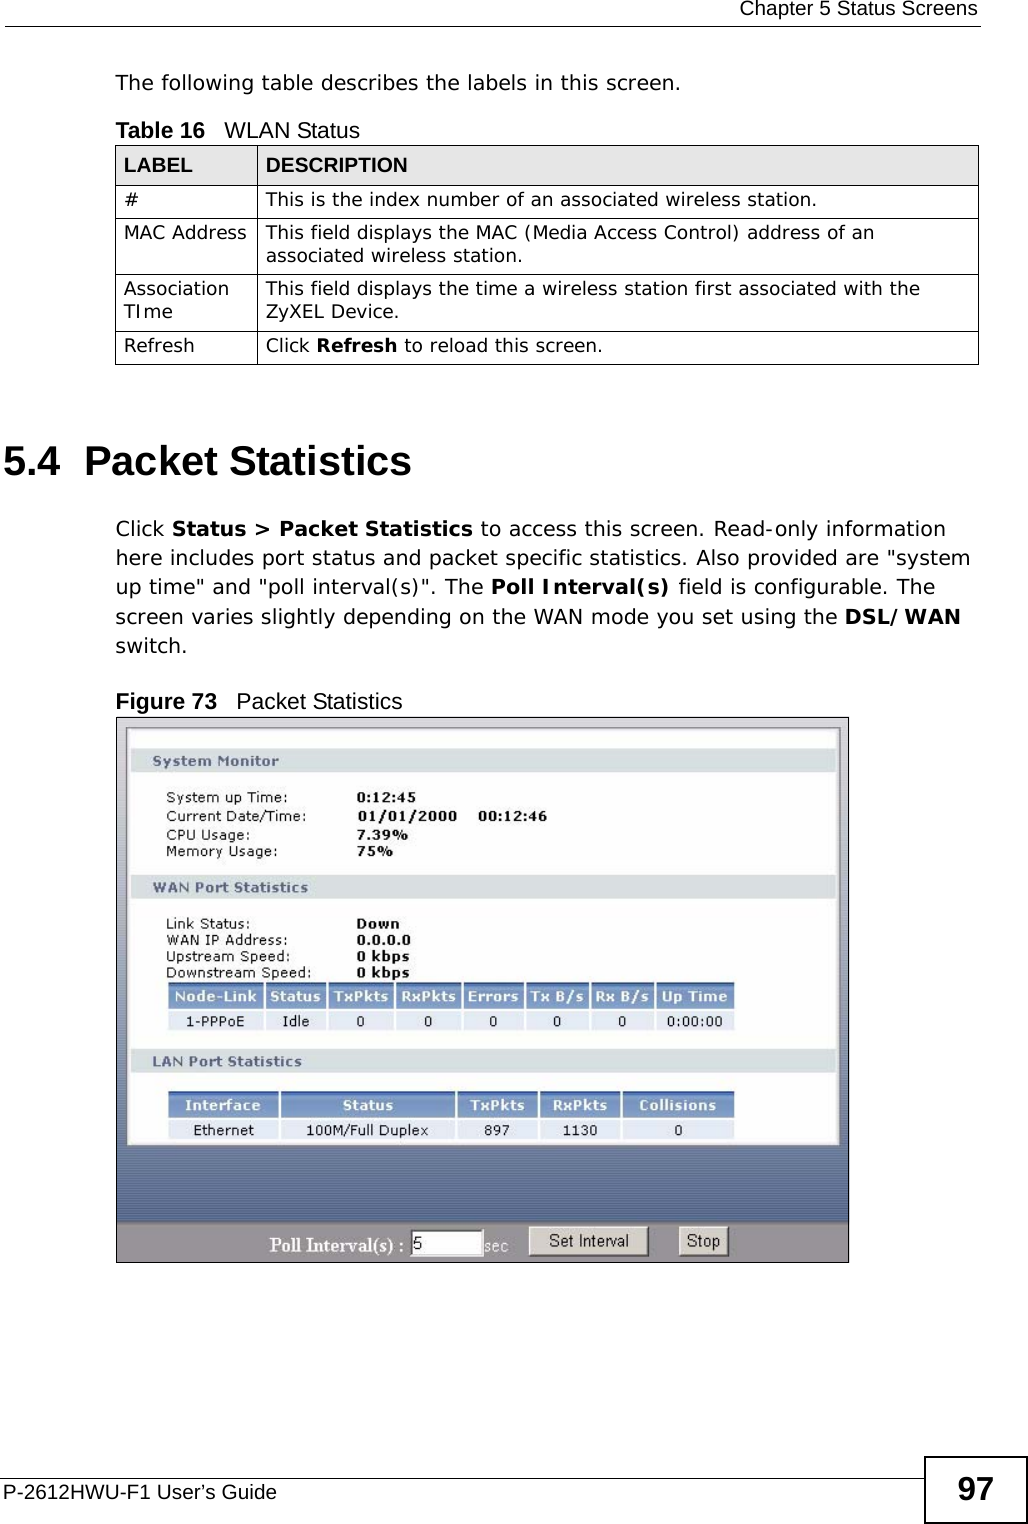  Chapter 5 Status ScreensP-2612HWU-F1 User’s Guide 97The following table describes the labels in this screen.5.4  Packet StatisticsClick Status &gt; Packet Statistics to access this screen. Read-only information here includes port status and packet specific statistics. Also provided are &quot;system up time&quot; and &quot;poll interval(s)&quot;. The Poll Interval(s) field is configurable. The screen varies slightly depending on the WAN mode you set using the DSL/WAN switch.Figure 73   Packet StatisticsTable 16   WLAN StatusLABEL  DESCRIPTION#  This is the index number of an associated wireless station. MAC Address This field displays the MAC (Media Access Control) address of an associated wireless station.Association TIme This field displays the time a wireless station first associated with the ZyXEL Device.Refresh Click Refresh to reload this screen.